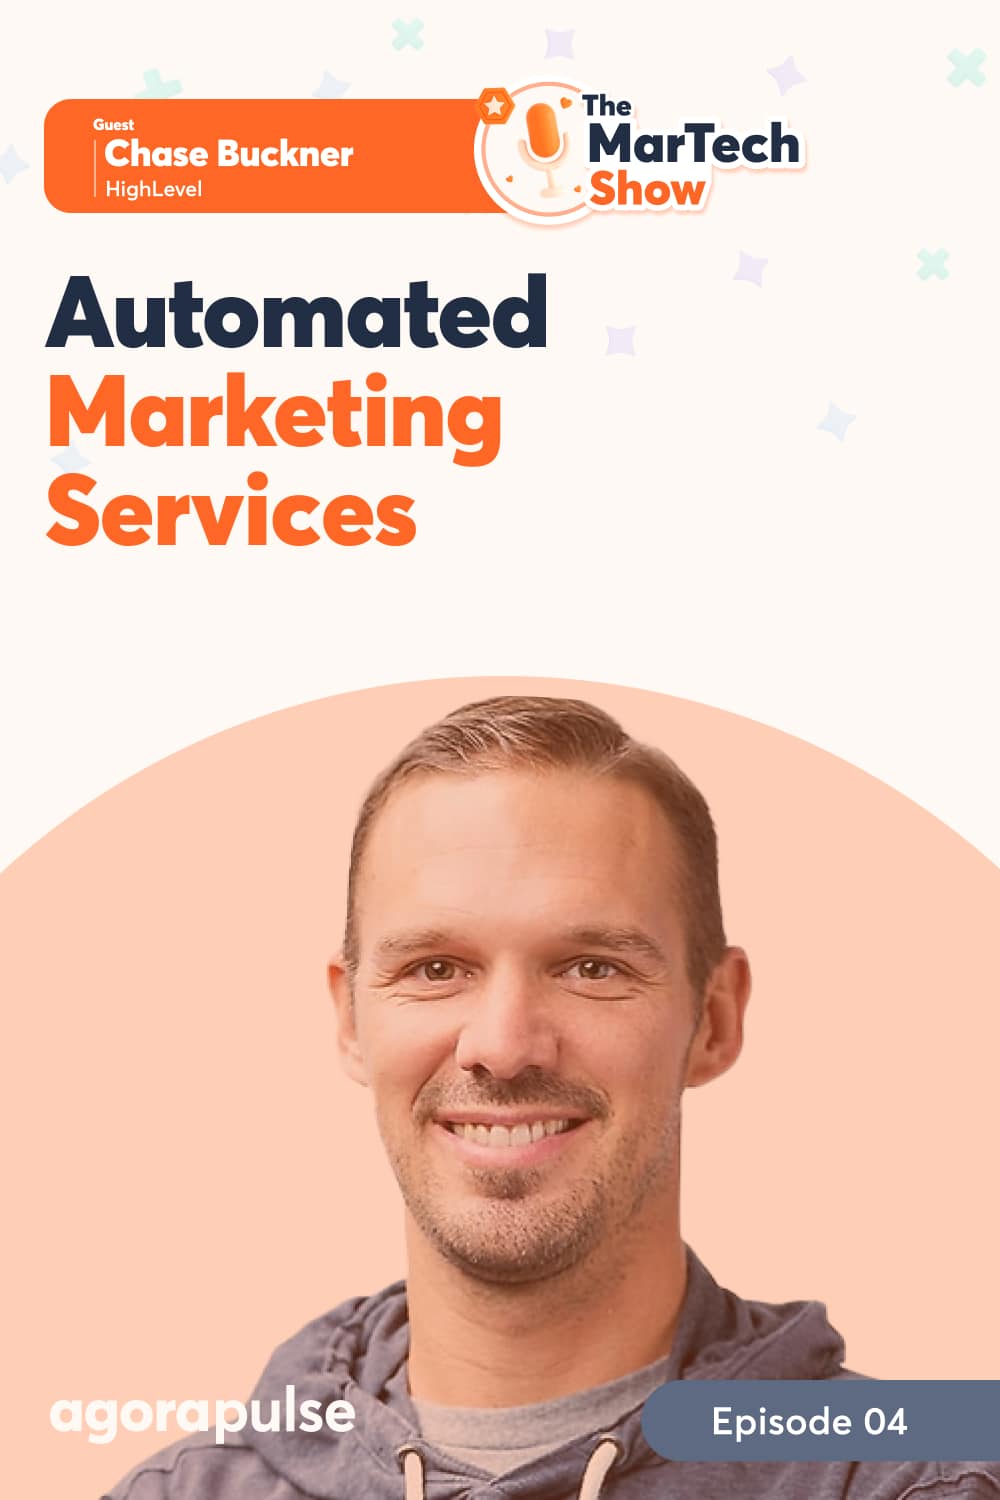 Automated Marketing Services to Provide Agency Clients [Podcast & Recap]